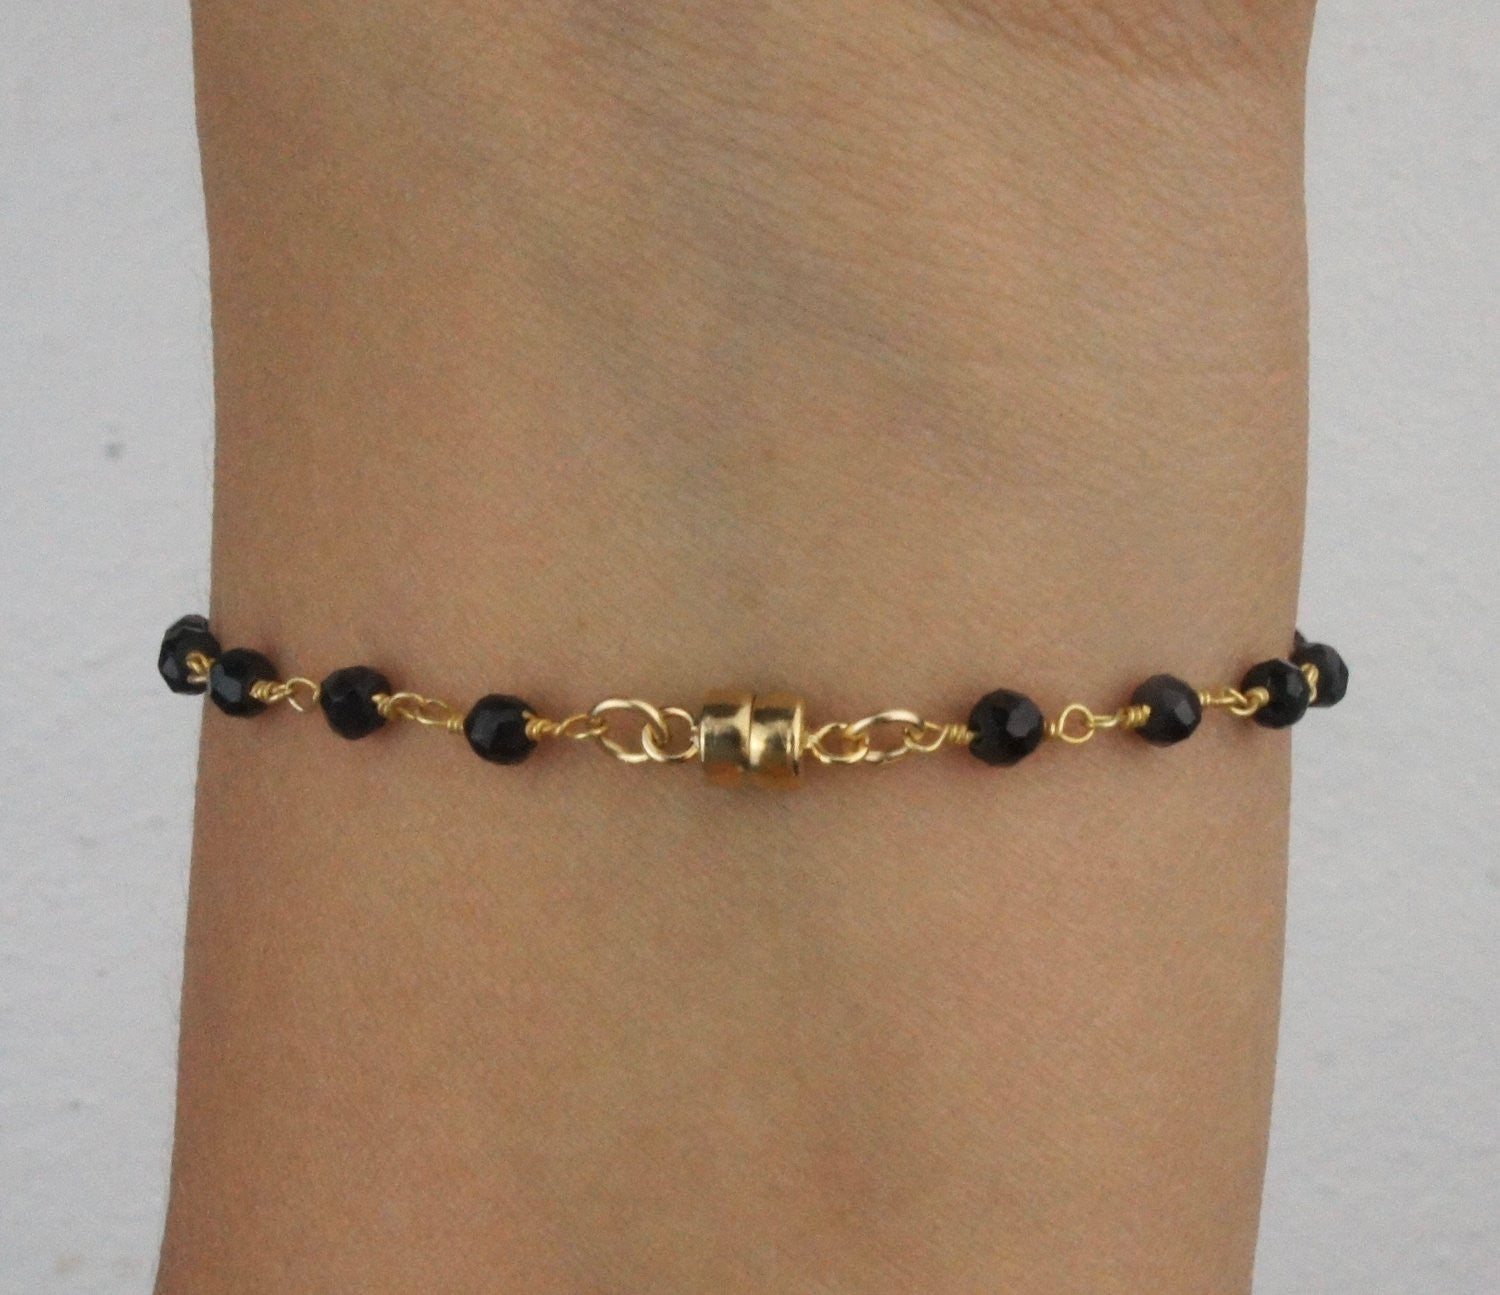 Black Spinel and Handmade Gold Bead Necklace